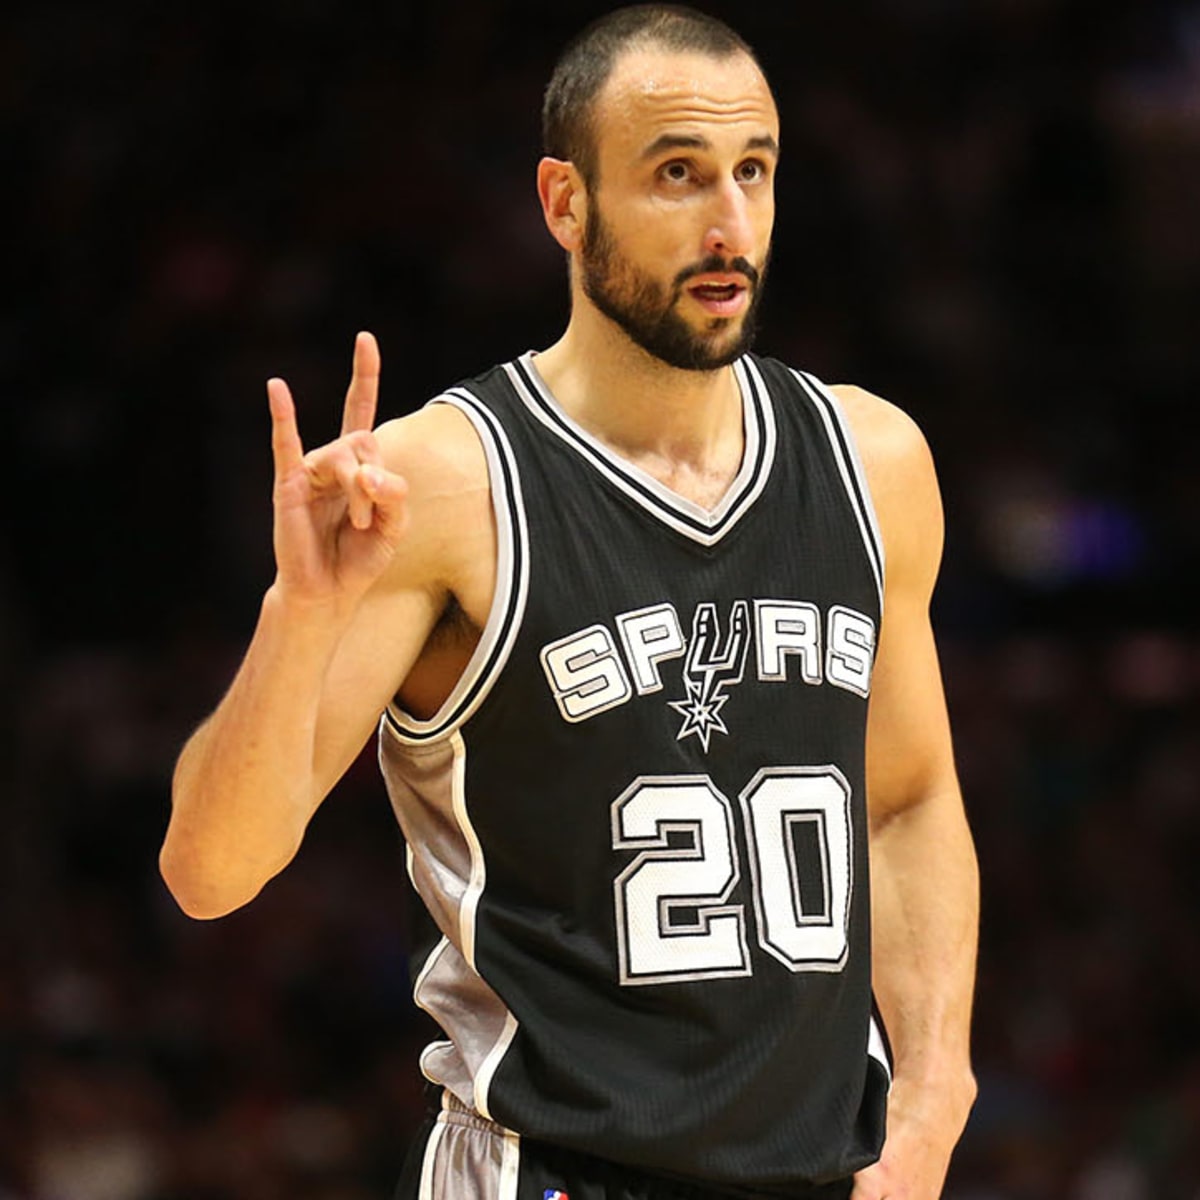 Spurs to retire Manu Ginobili's jersey in March ceremony